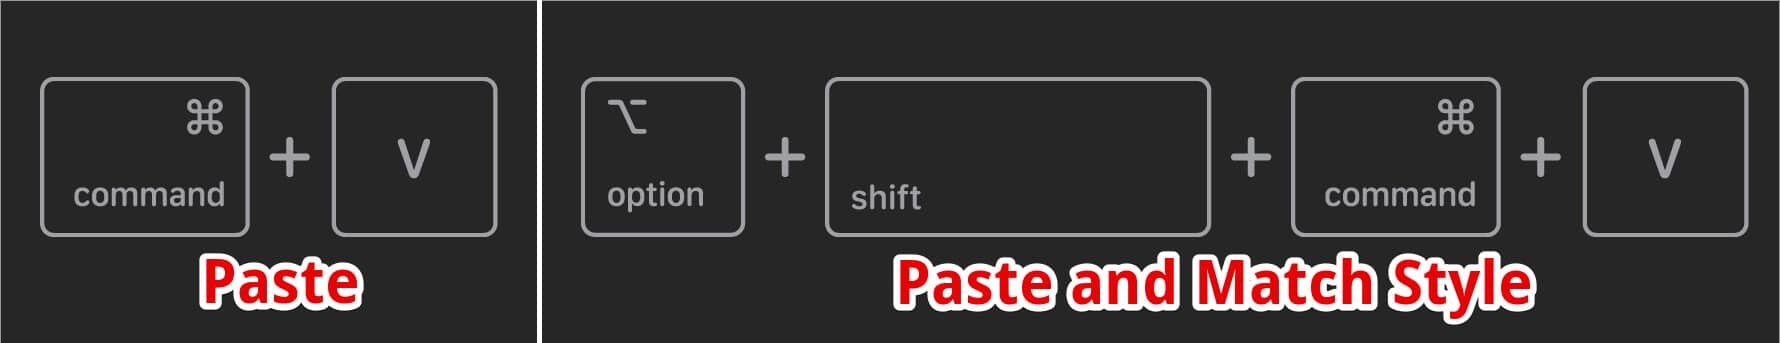 Difference between Paste and Paste and Match Style on Mac